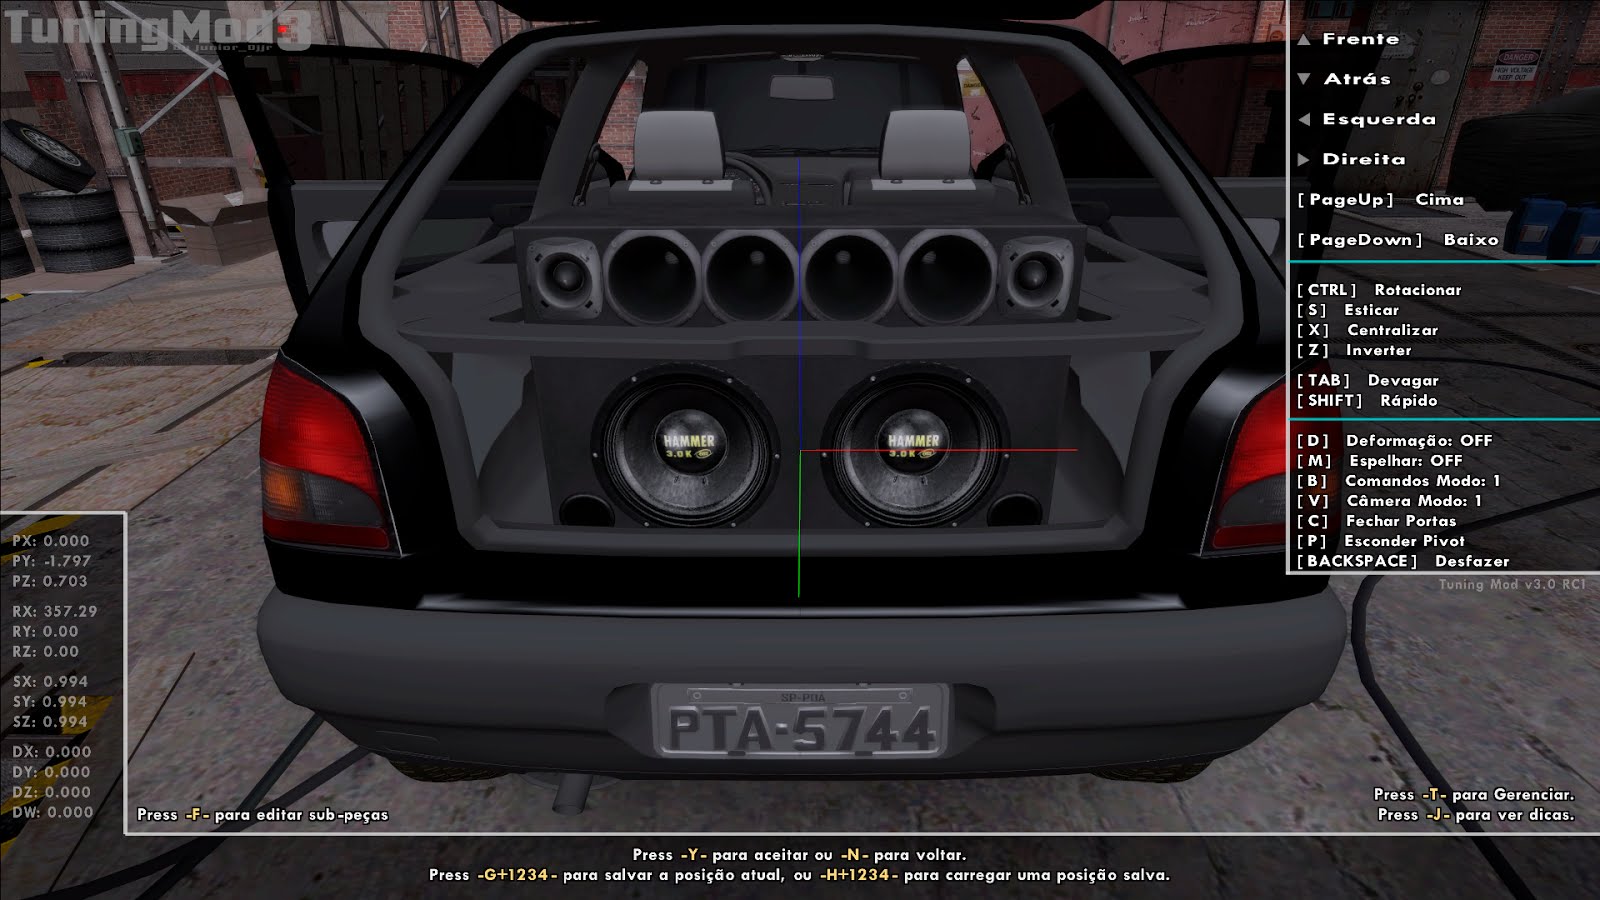 Tuning Mod by Junior_Djjr for Grand Theft Auto: San Andreas - ModDB